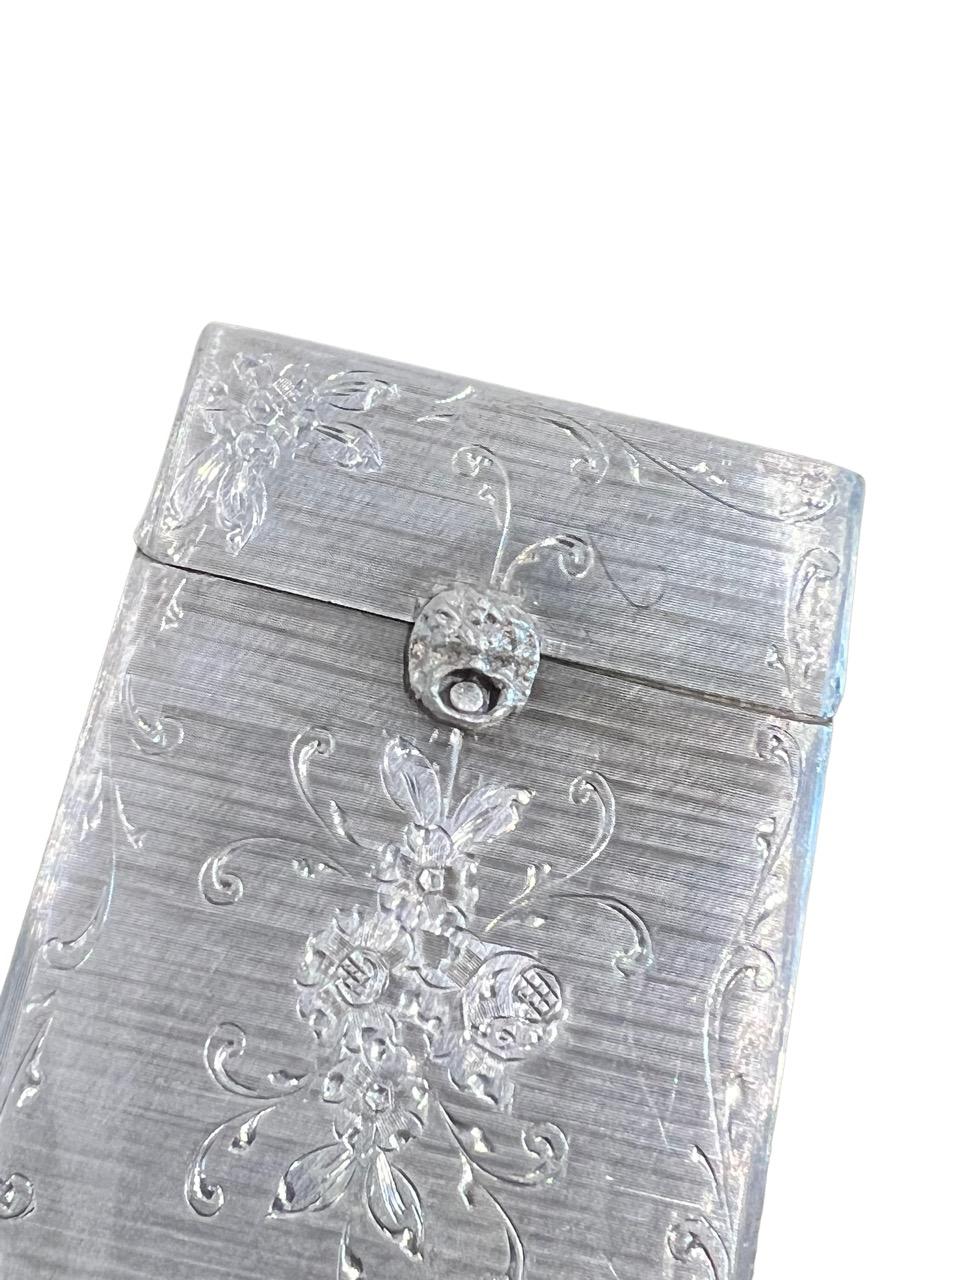 Set of two Sterling Silver Cigarette Cases 19th and 20 Century, Mario Buccellat For Sale 6